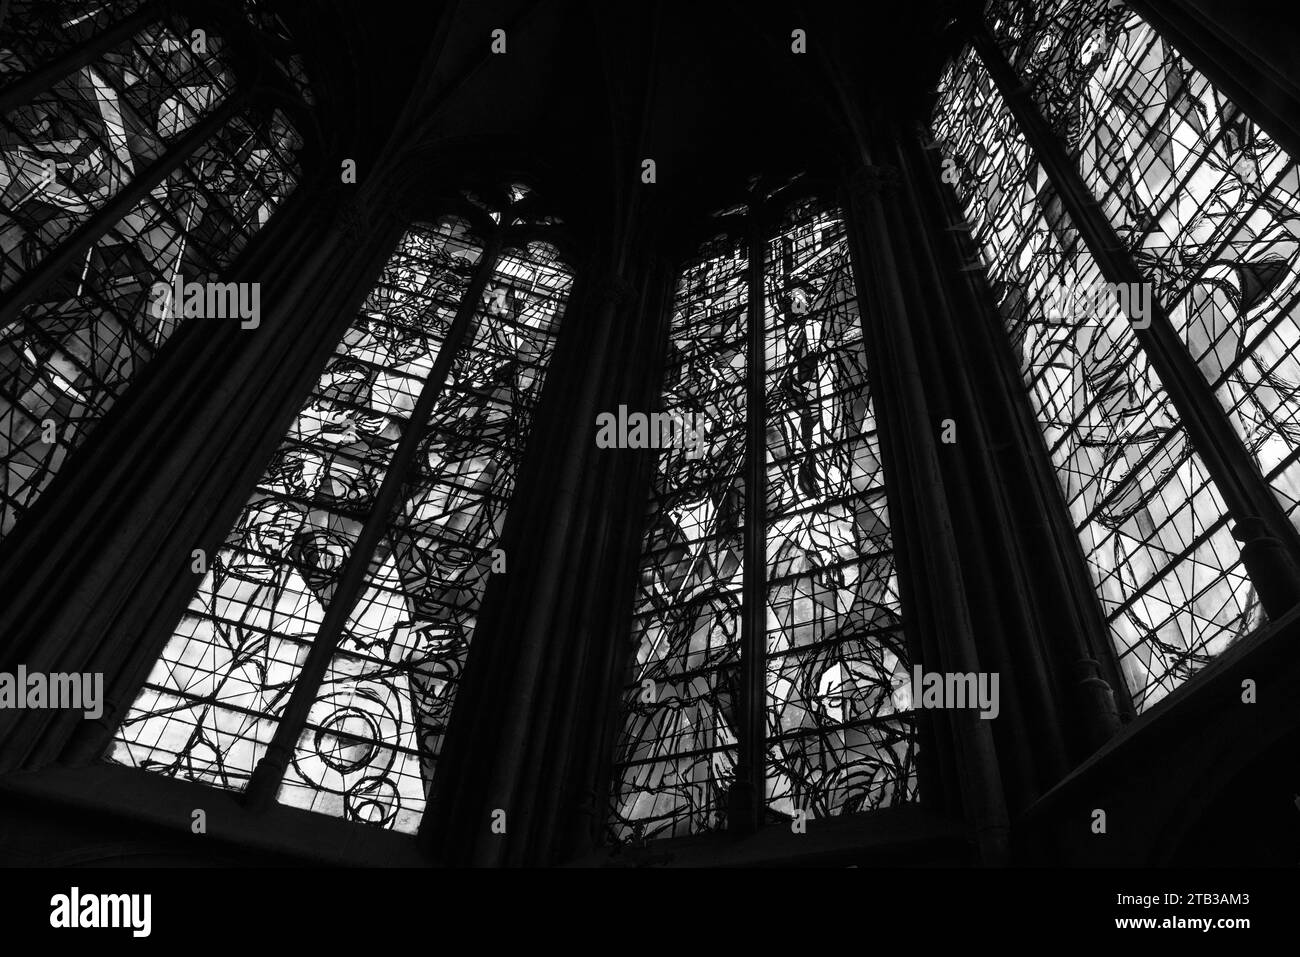 Stained glasses by Jacques Villon representing Last Supper, Crucifixion, Easter in Saint Etienne cathedral of Metz, France. Black white historic photo Stock Photo